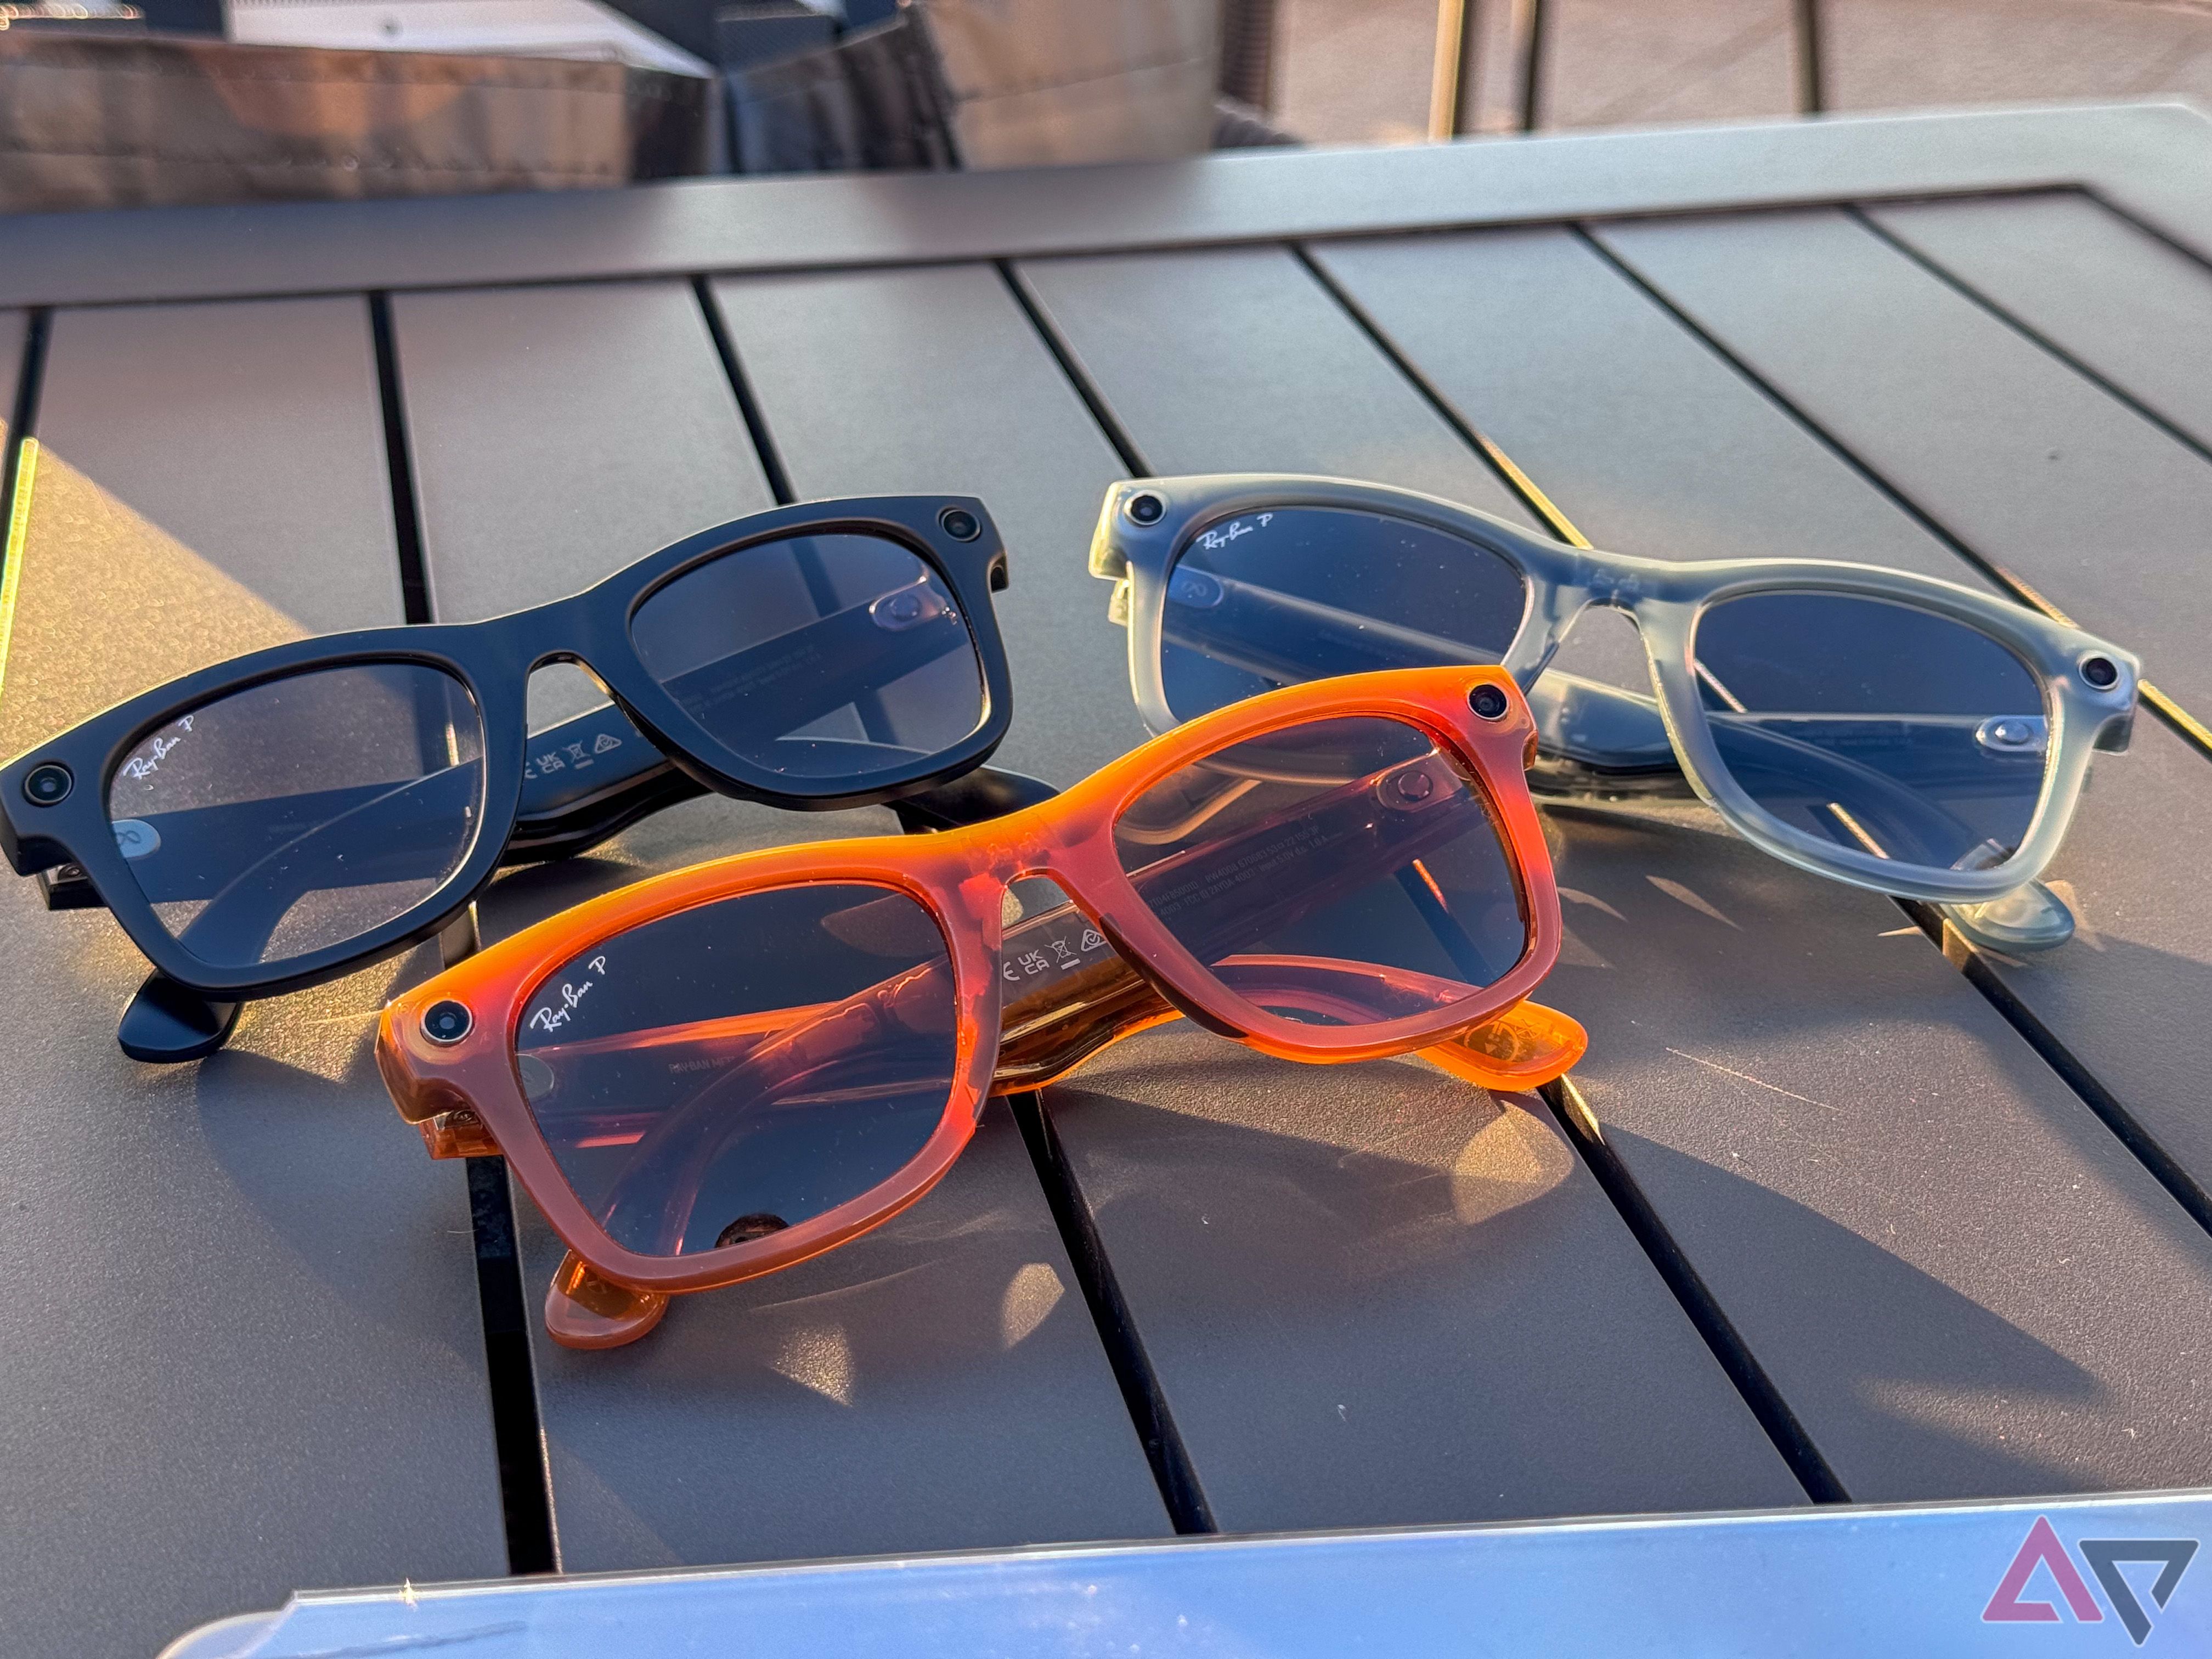 Ray-Ban Meta Blue Jeans, Black and Orange side-by-side